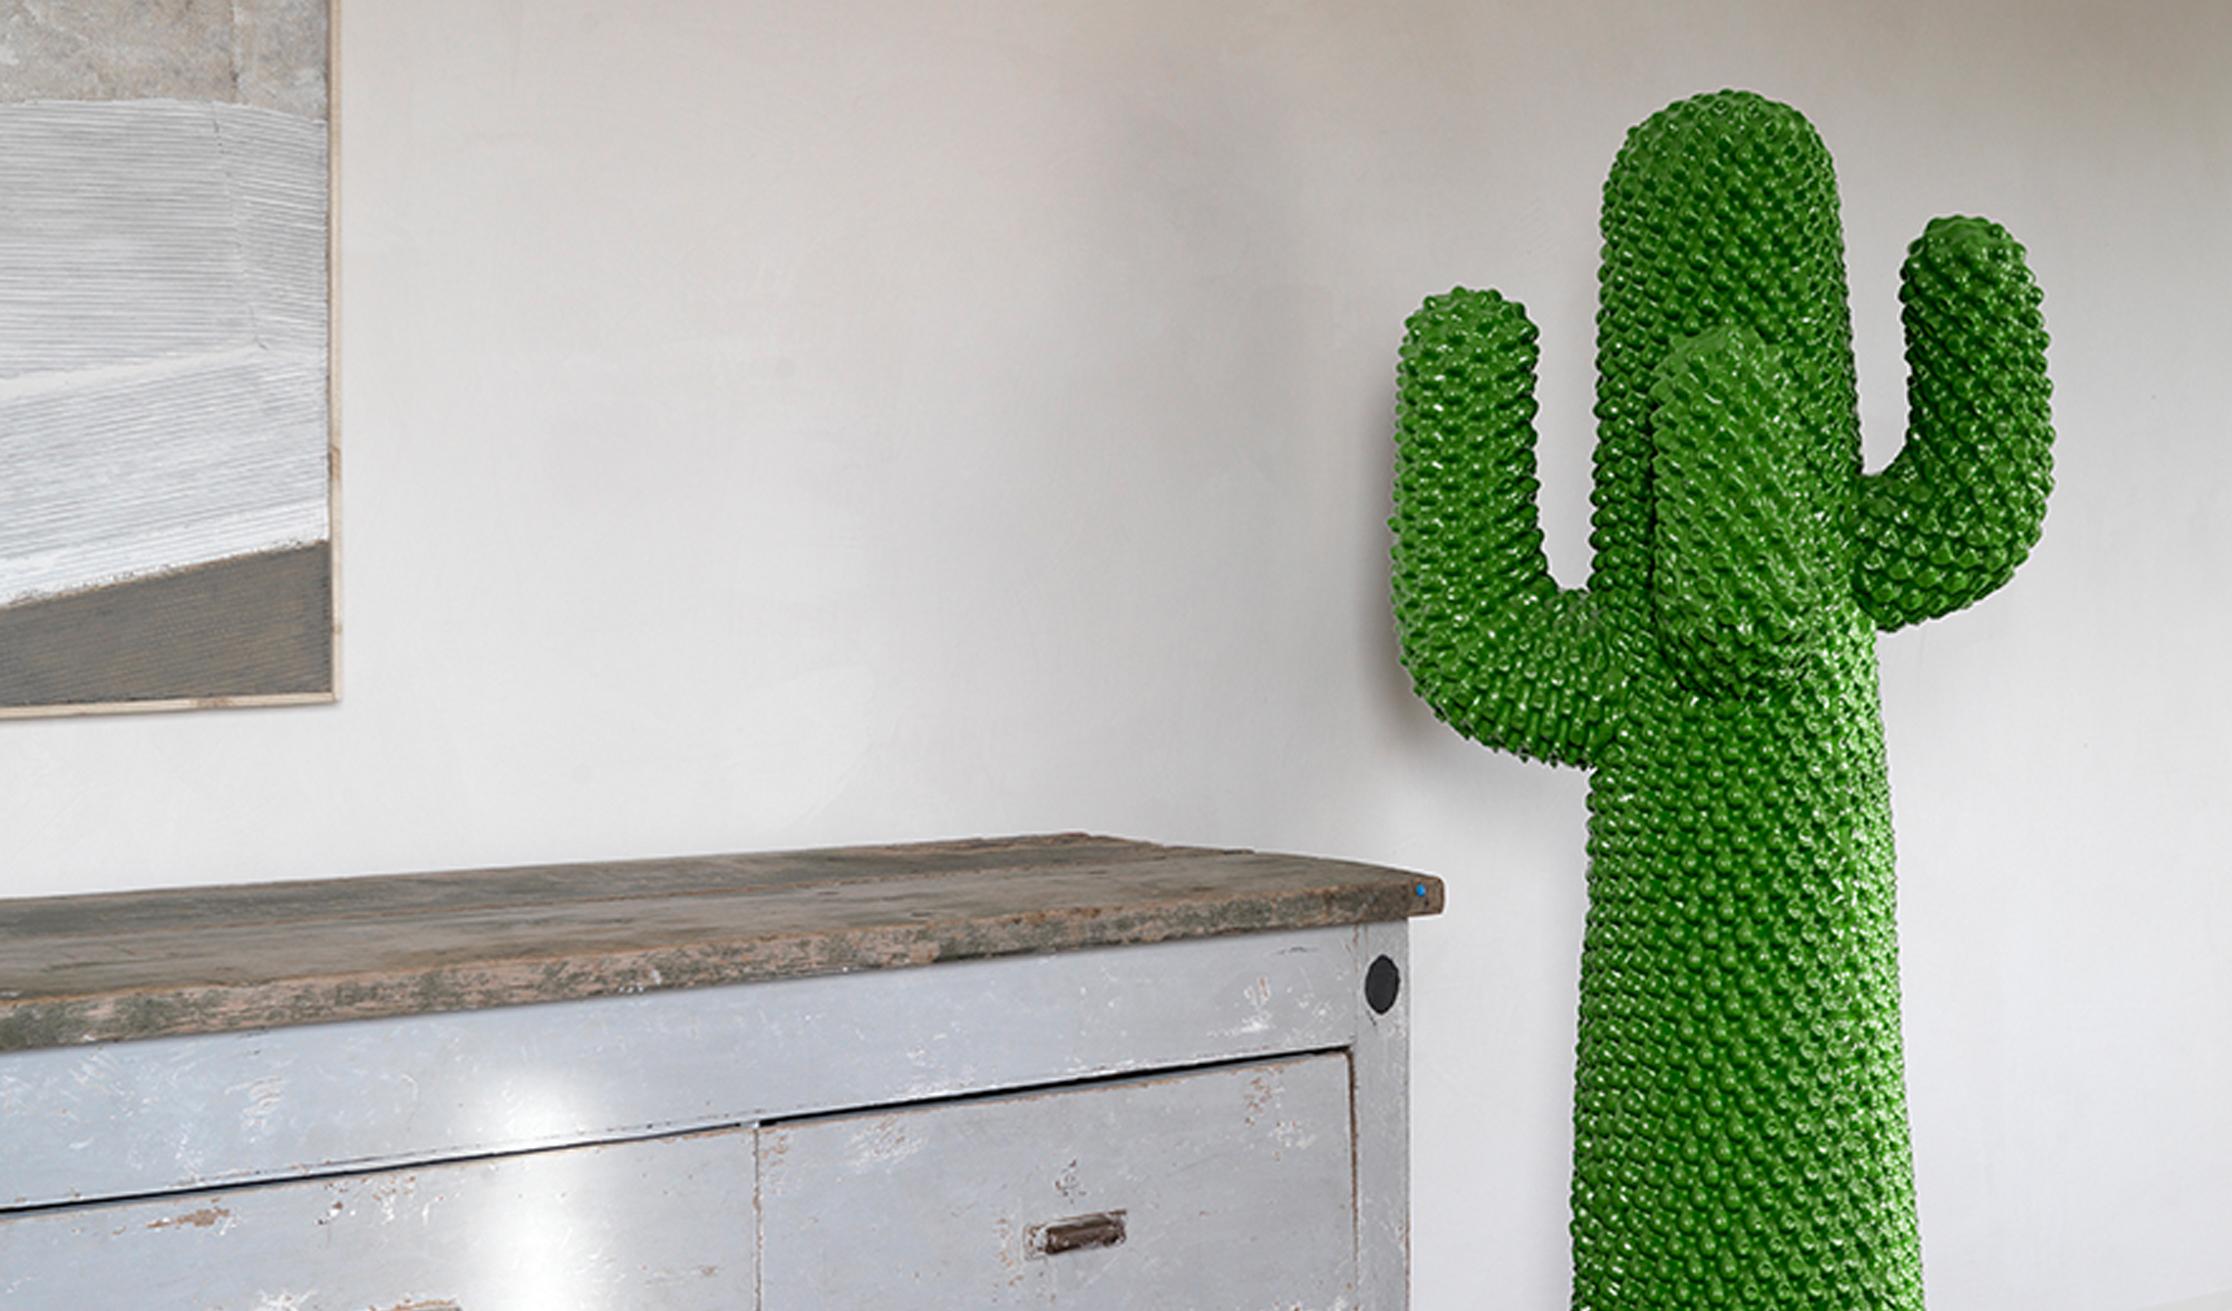 Italian Another Green Cactus, Coat Stand / Sculpture by Drocco / Mello for Gufram For Sale